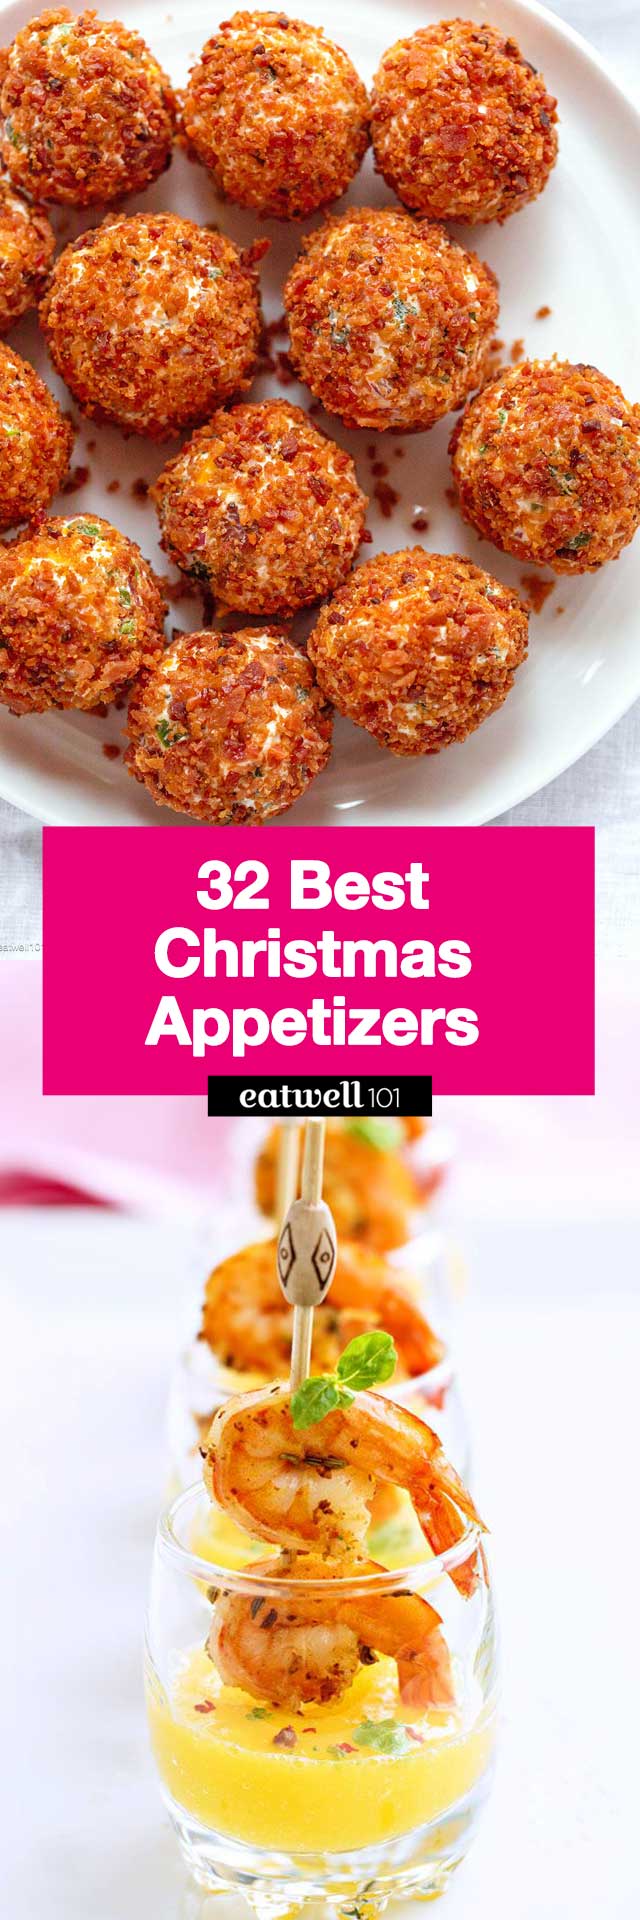 32 Easy Christmas Appetizers Recipes - #christmas #holiday #recipes #eatwell101 - These easy Christmas appetizers cover everything from dips to hot appetizers to cheese balls and more!